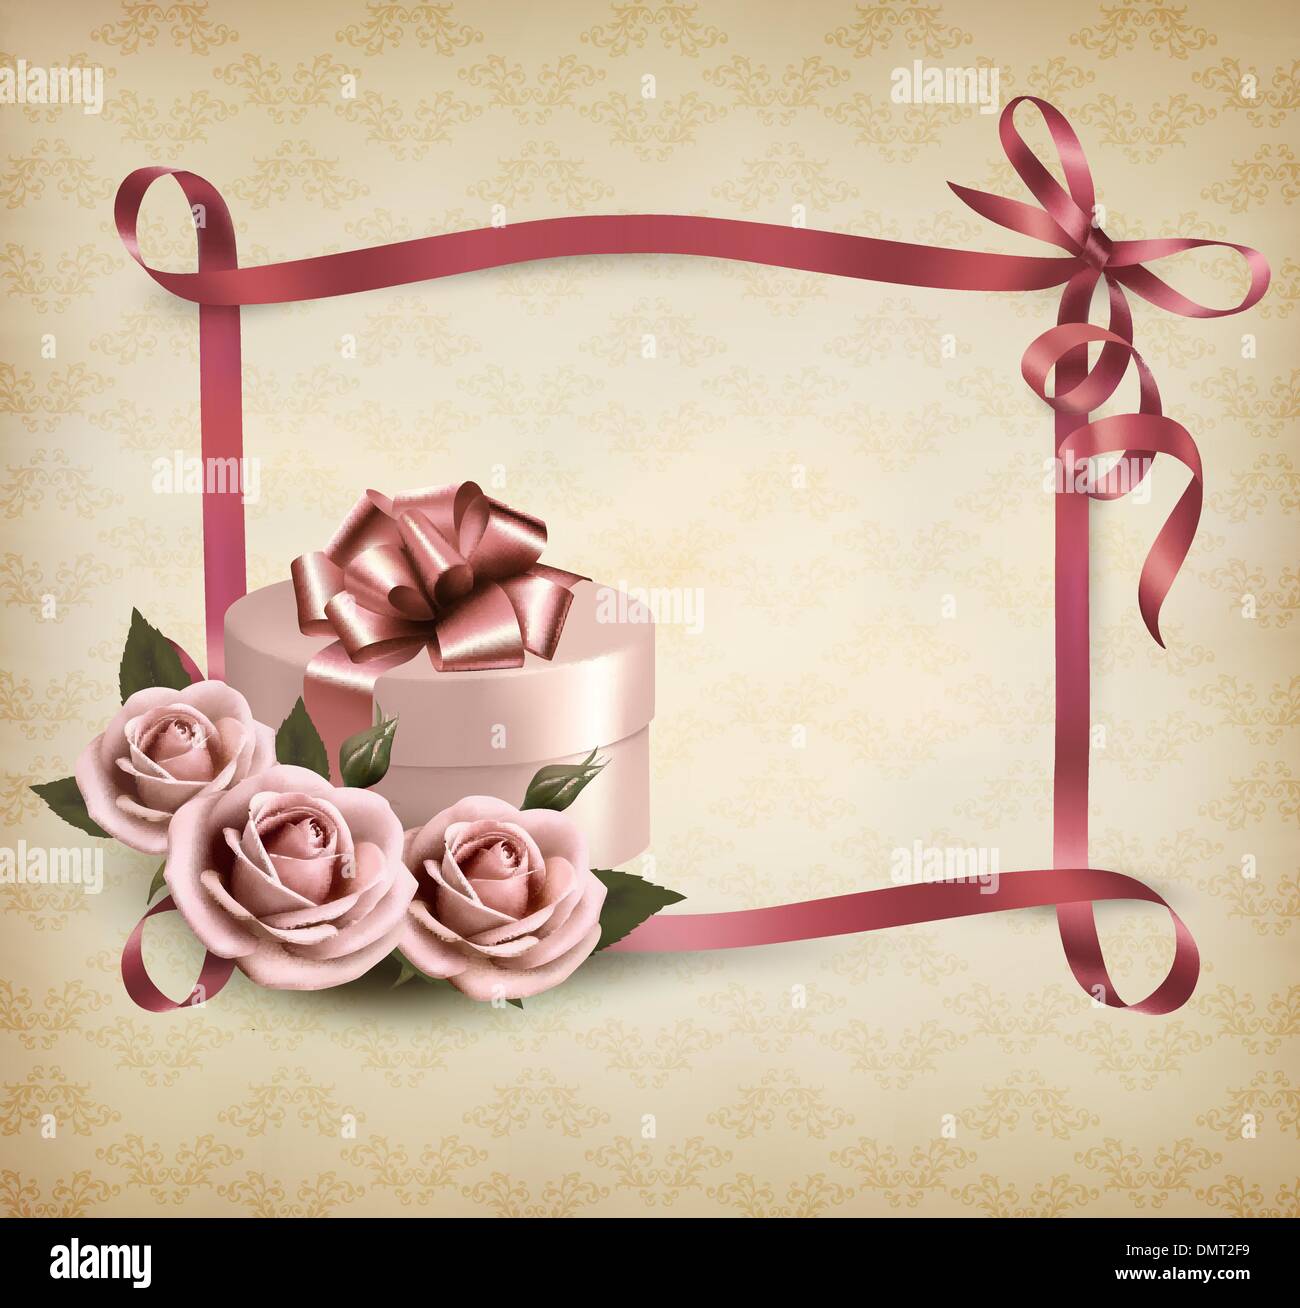 Holiday background with three roses and gift box and ribbon. Vec Stock Vector